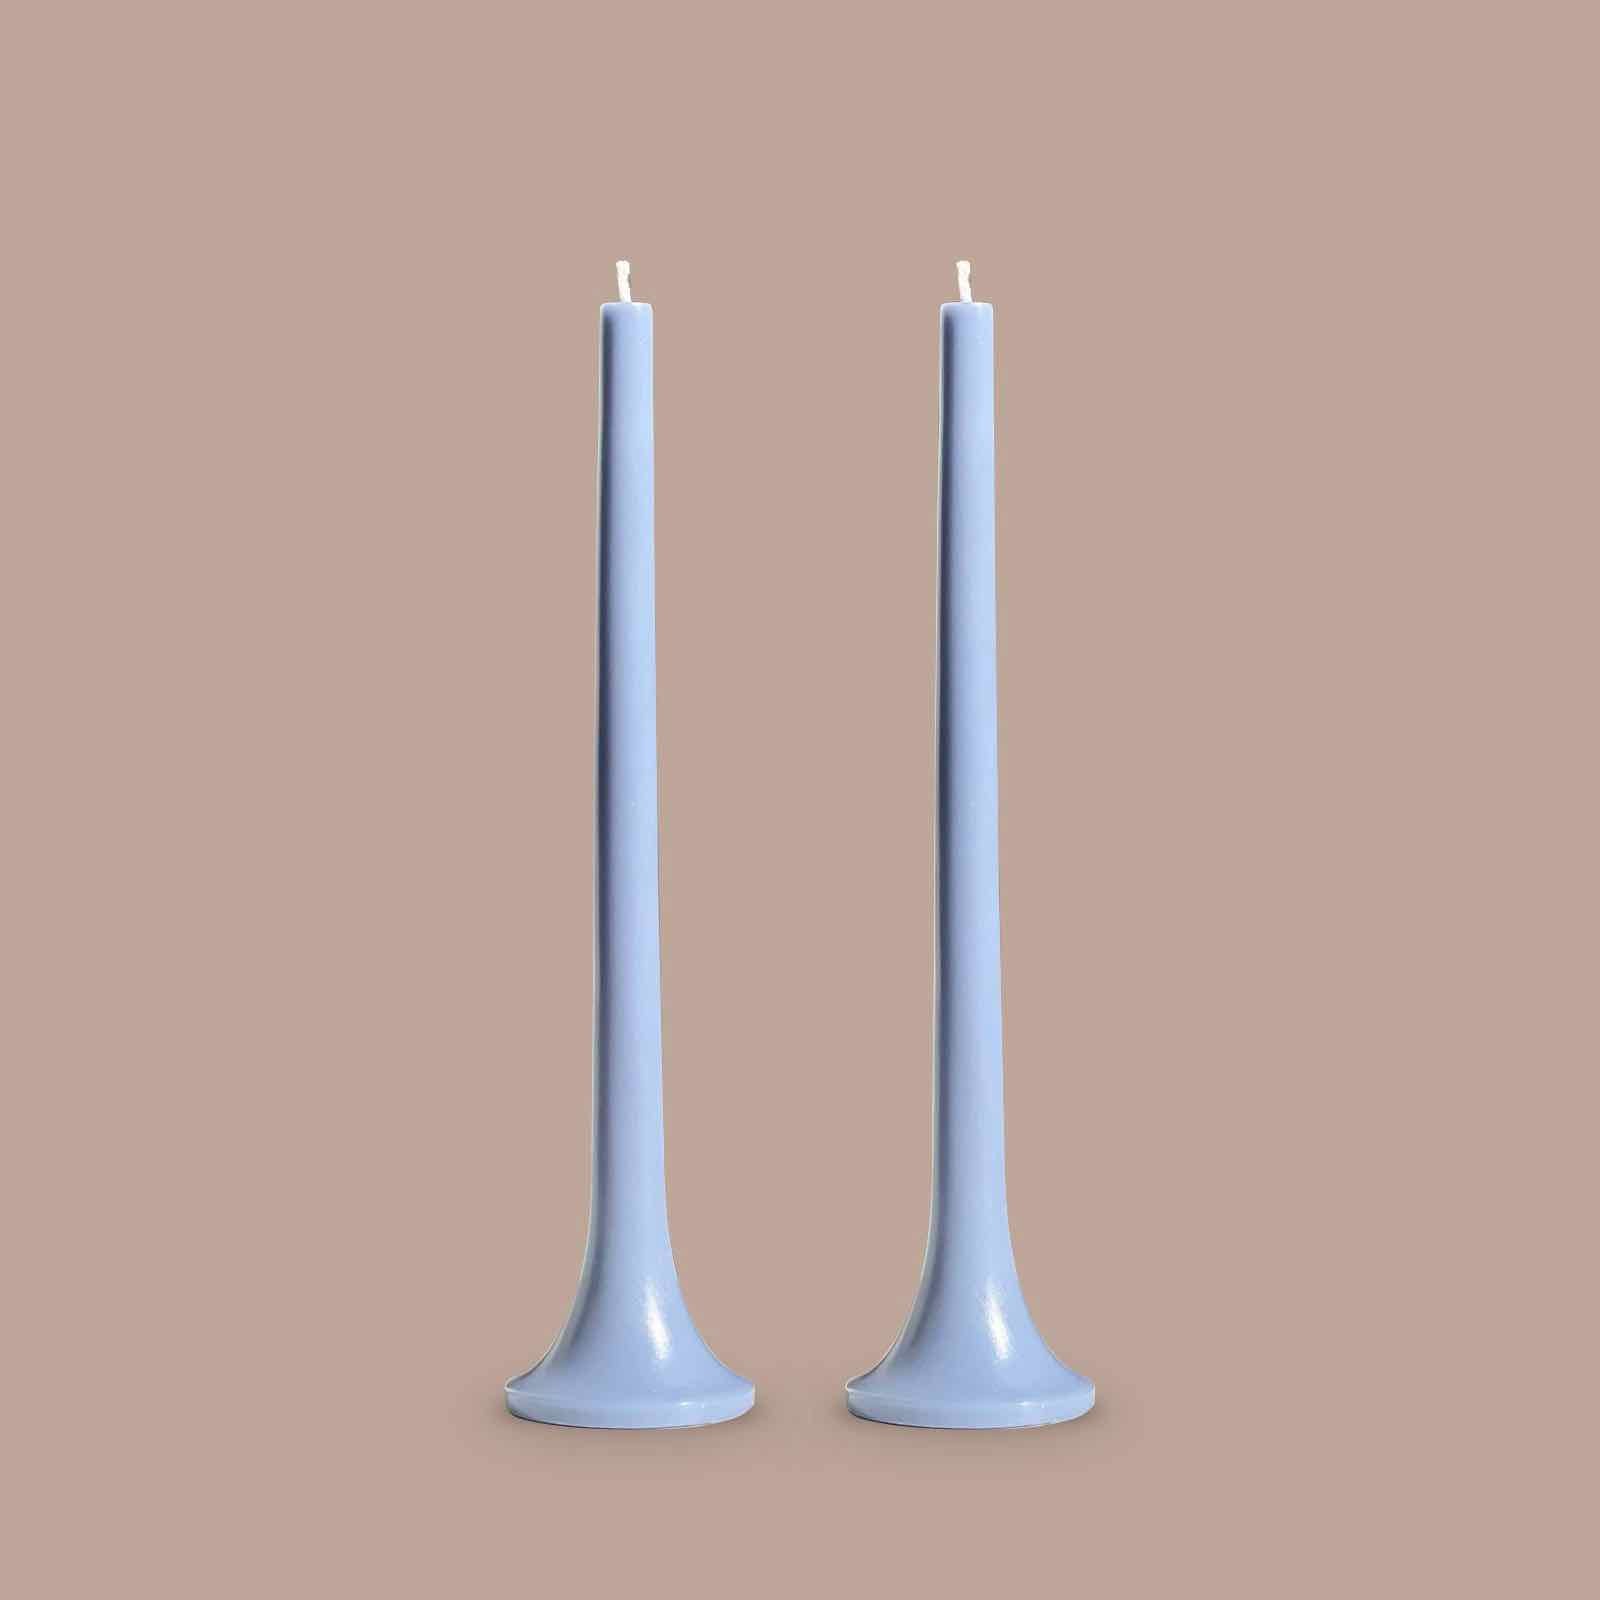 Sky blue taper candle